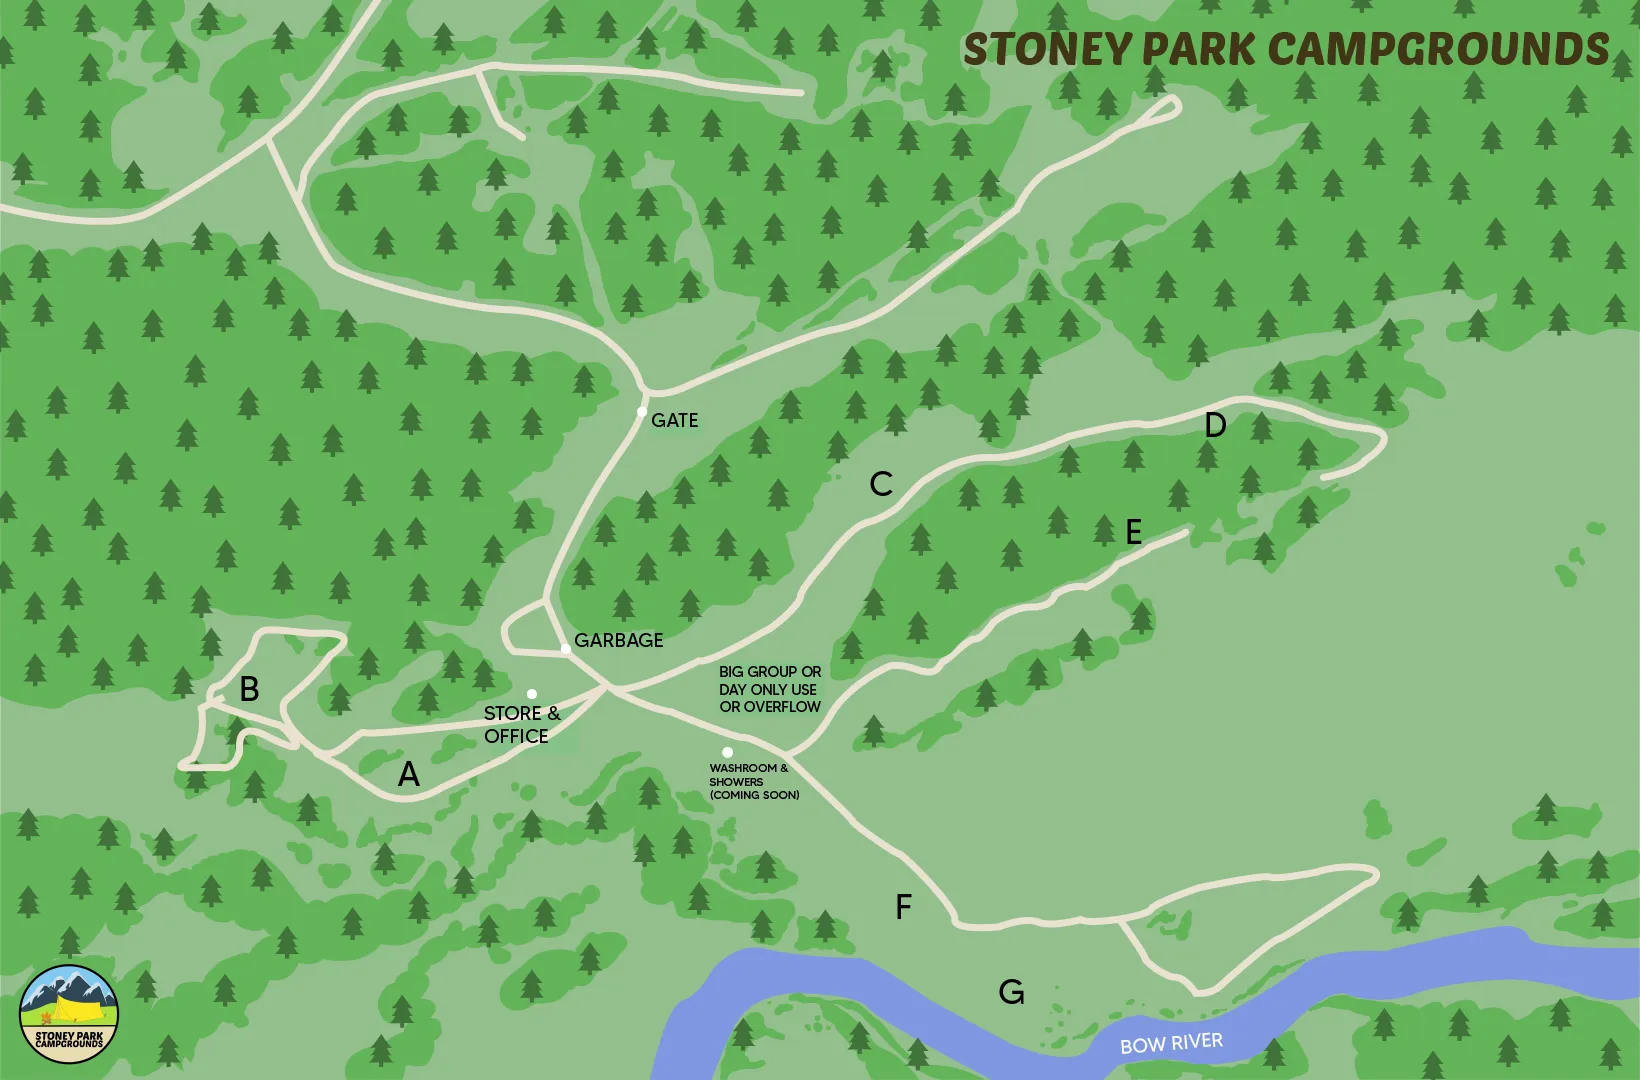 Layout of Stoney Campgrounds